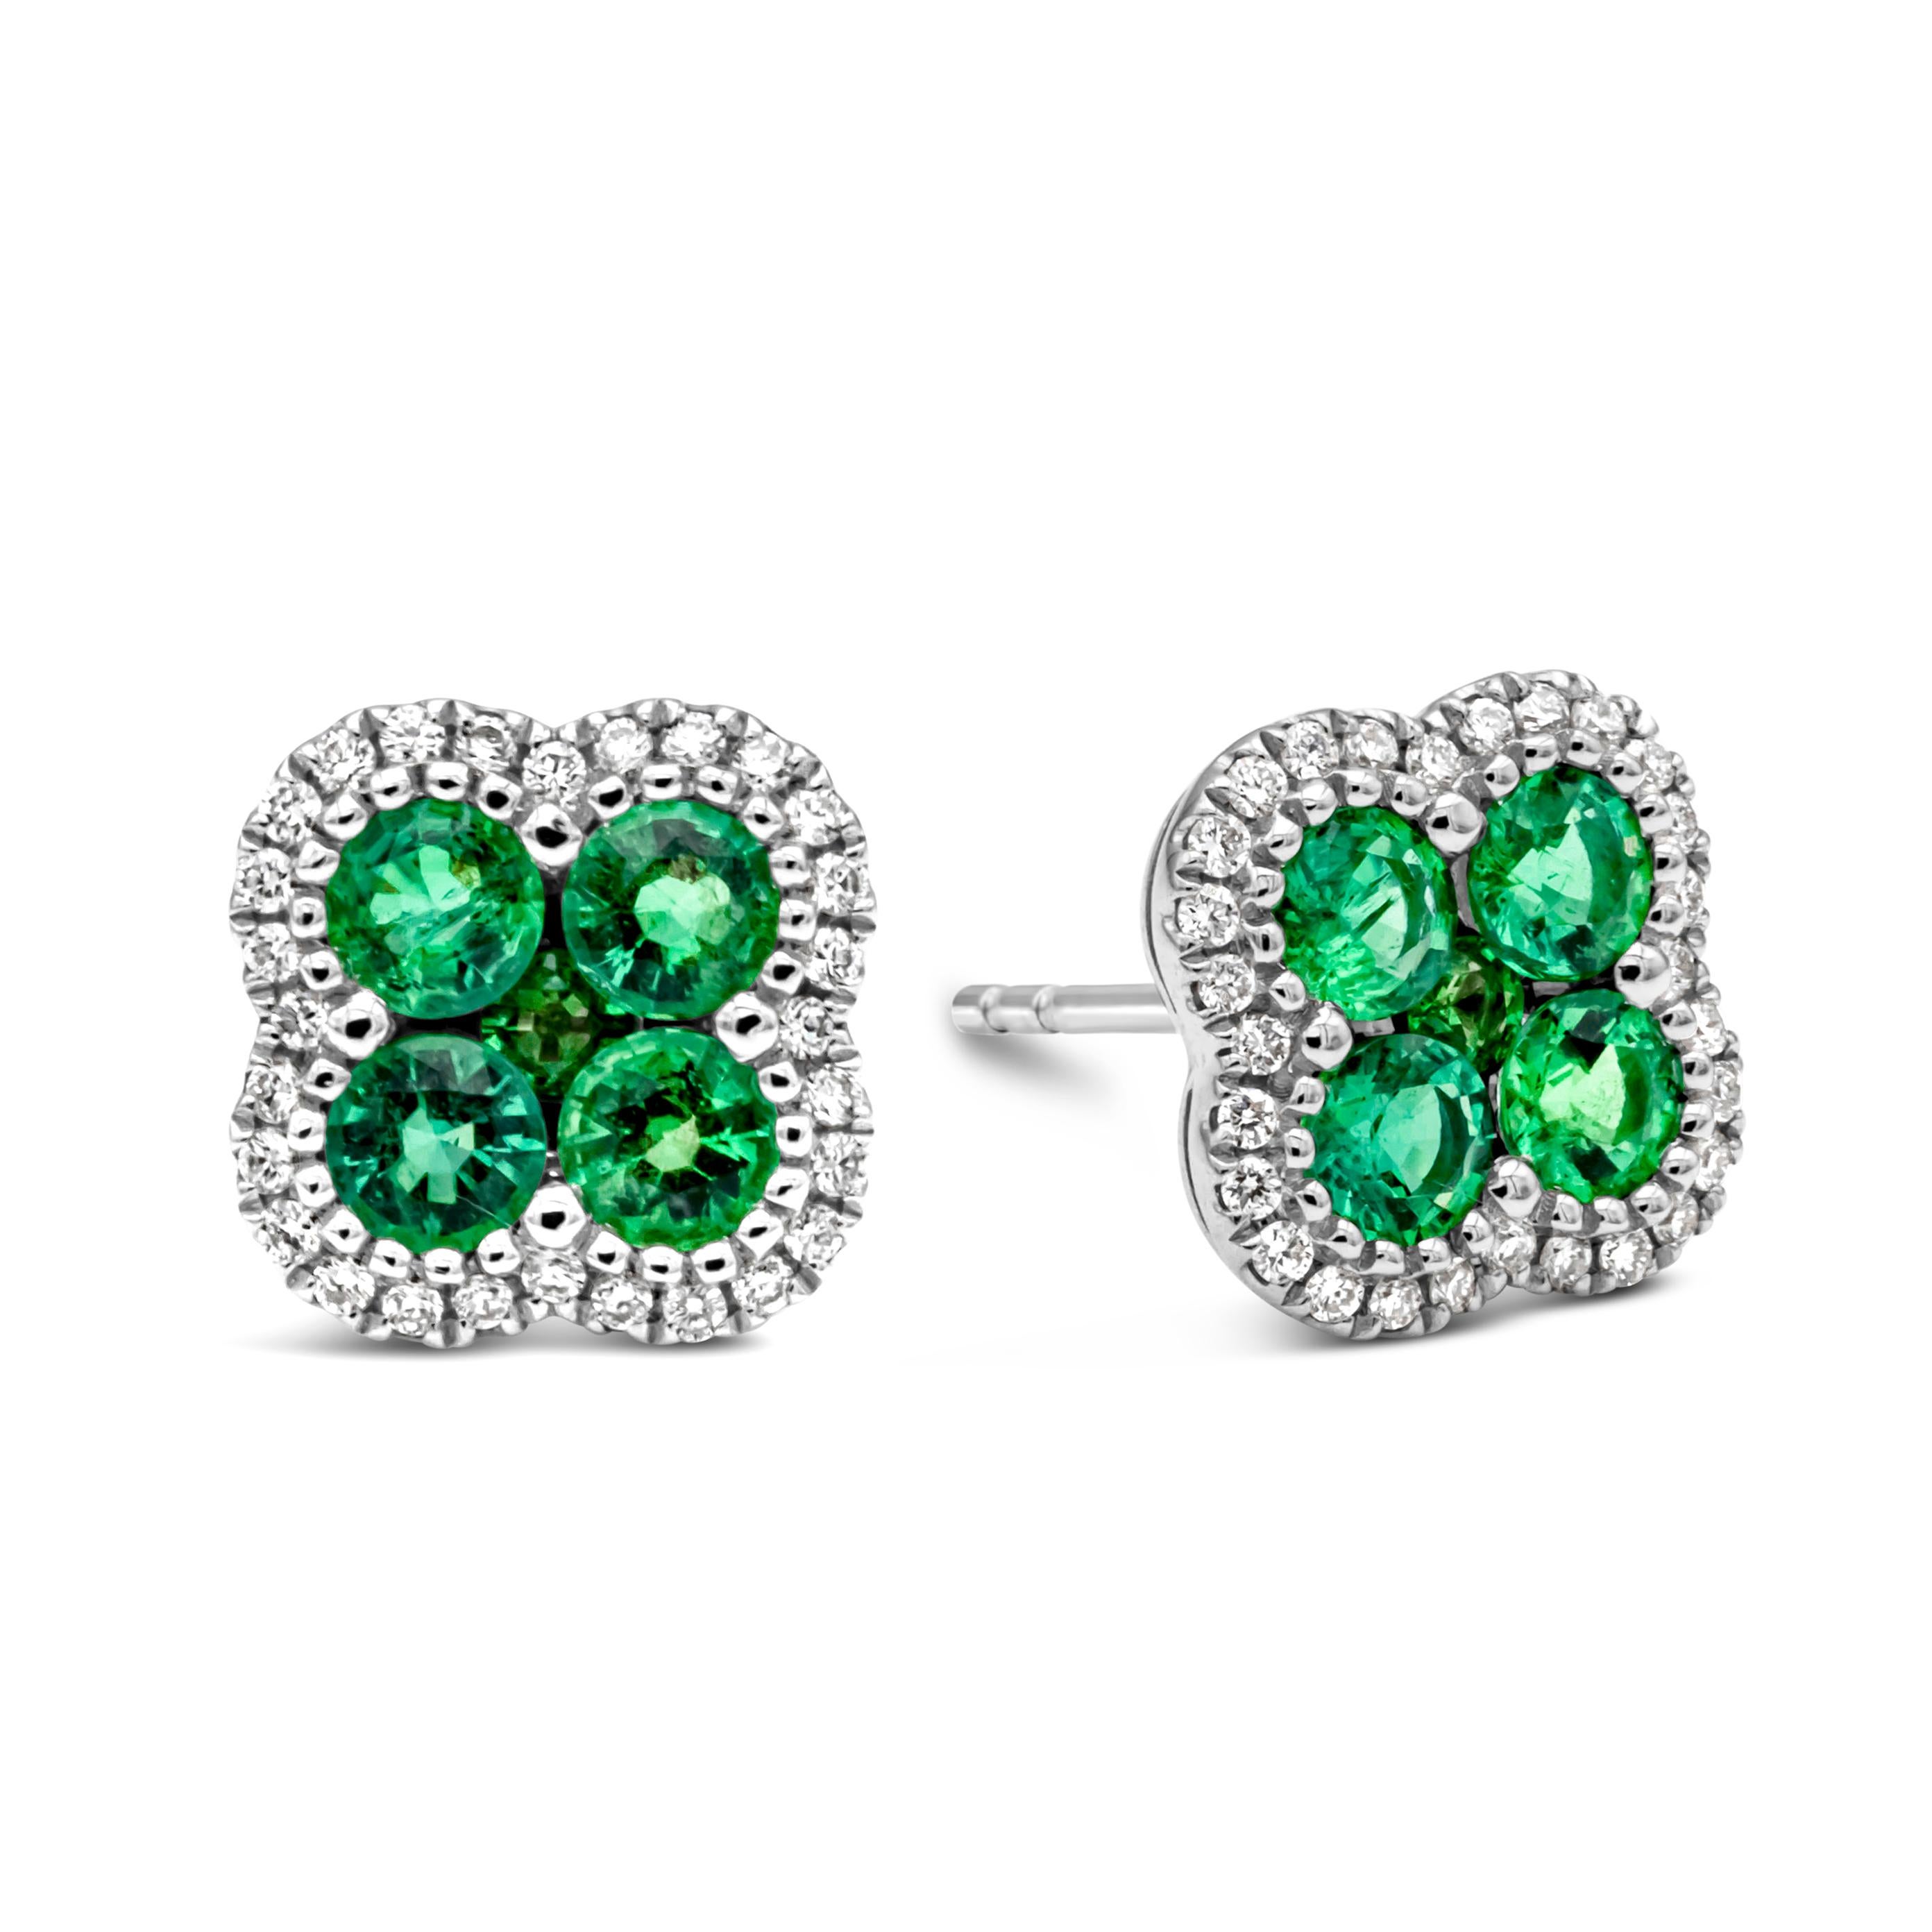 A simple and chic pair of stud earrings showcasing a cluster of round brilliant Colombian green emeralds weighing 1.05 carats total, arranged in a beautiful clover design and shared prong setting. Surrounded by a single row of round brilliant